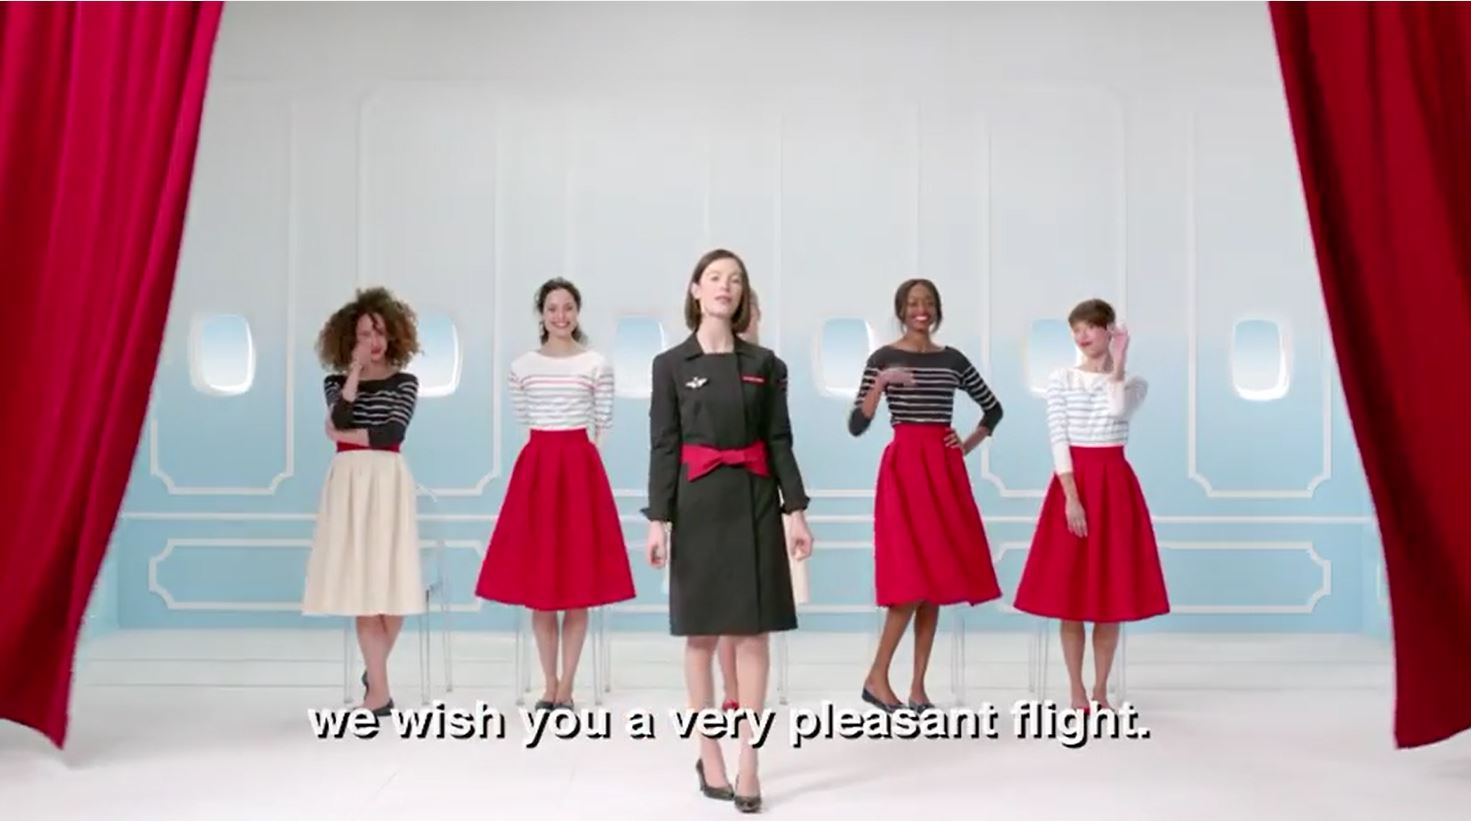 Air France: New Safety Demonstration Video